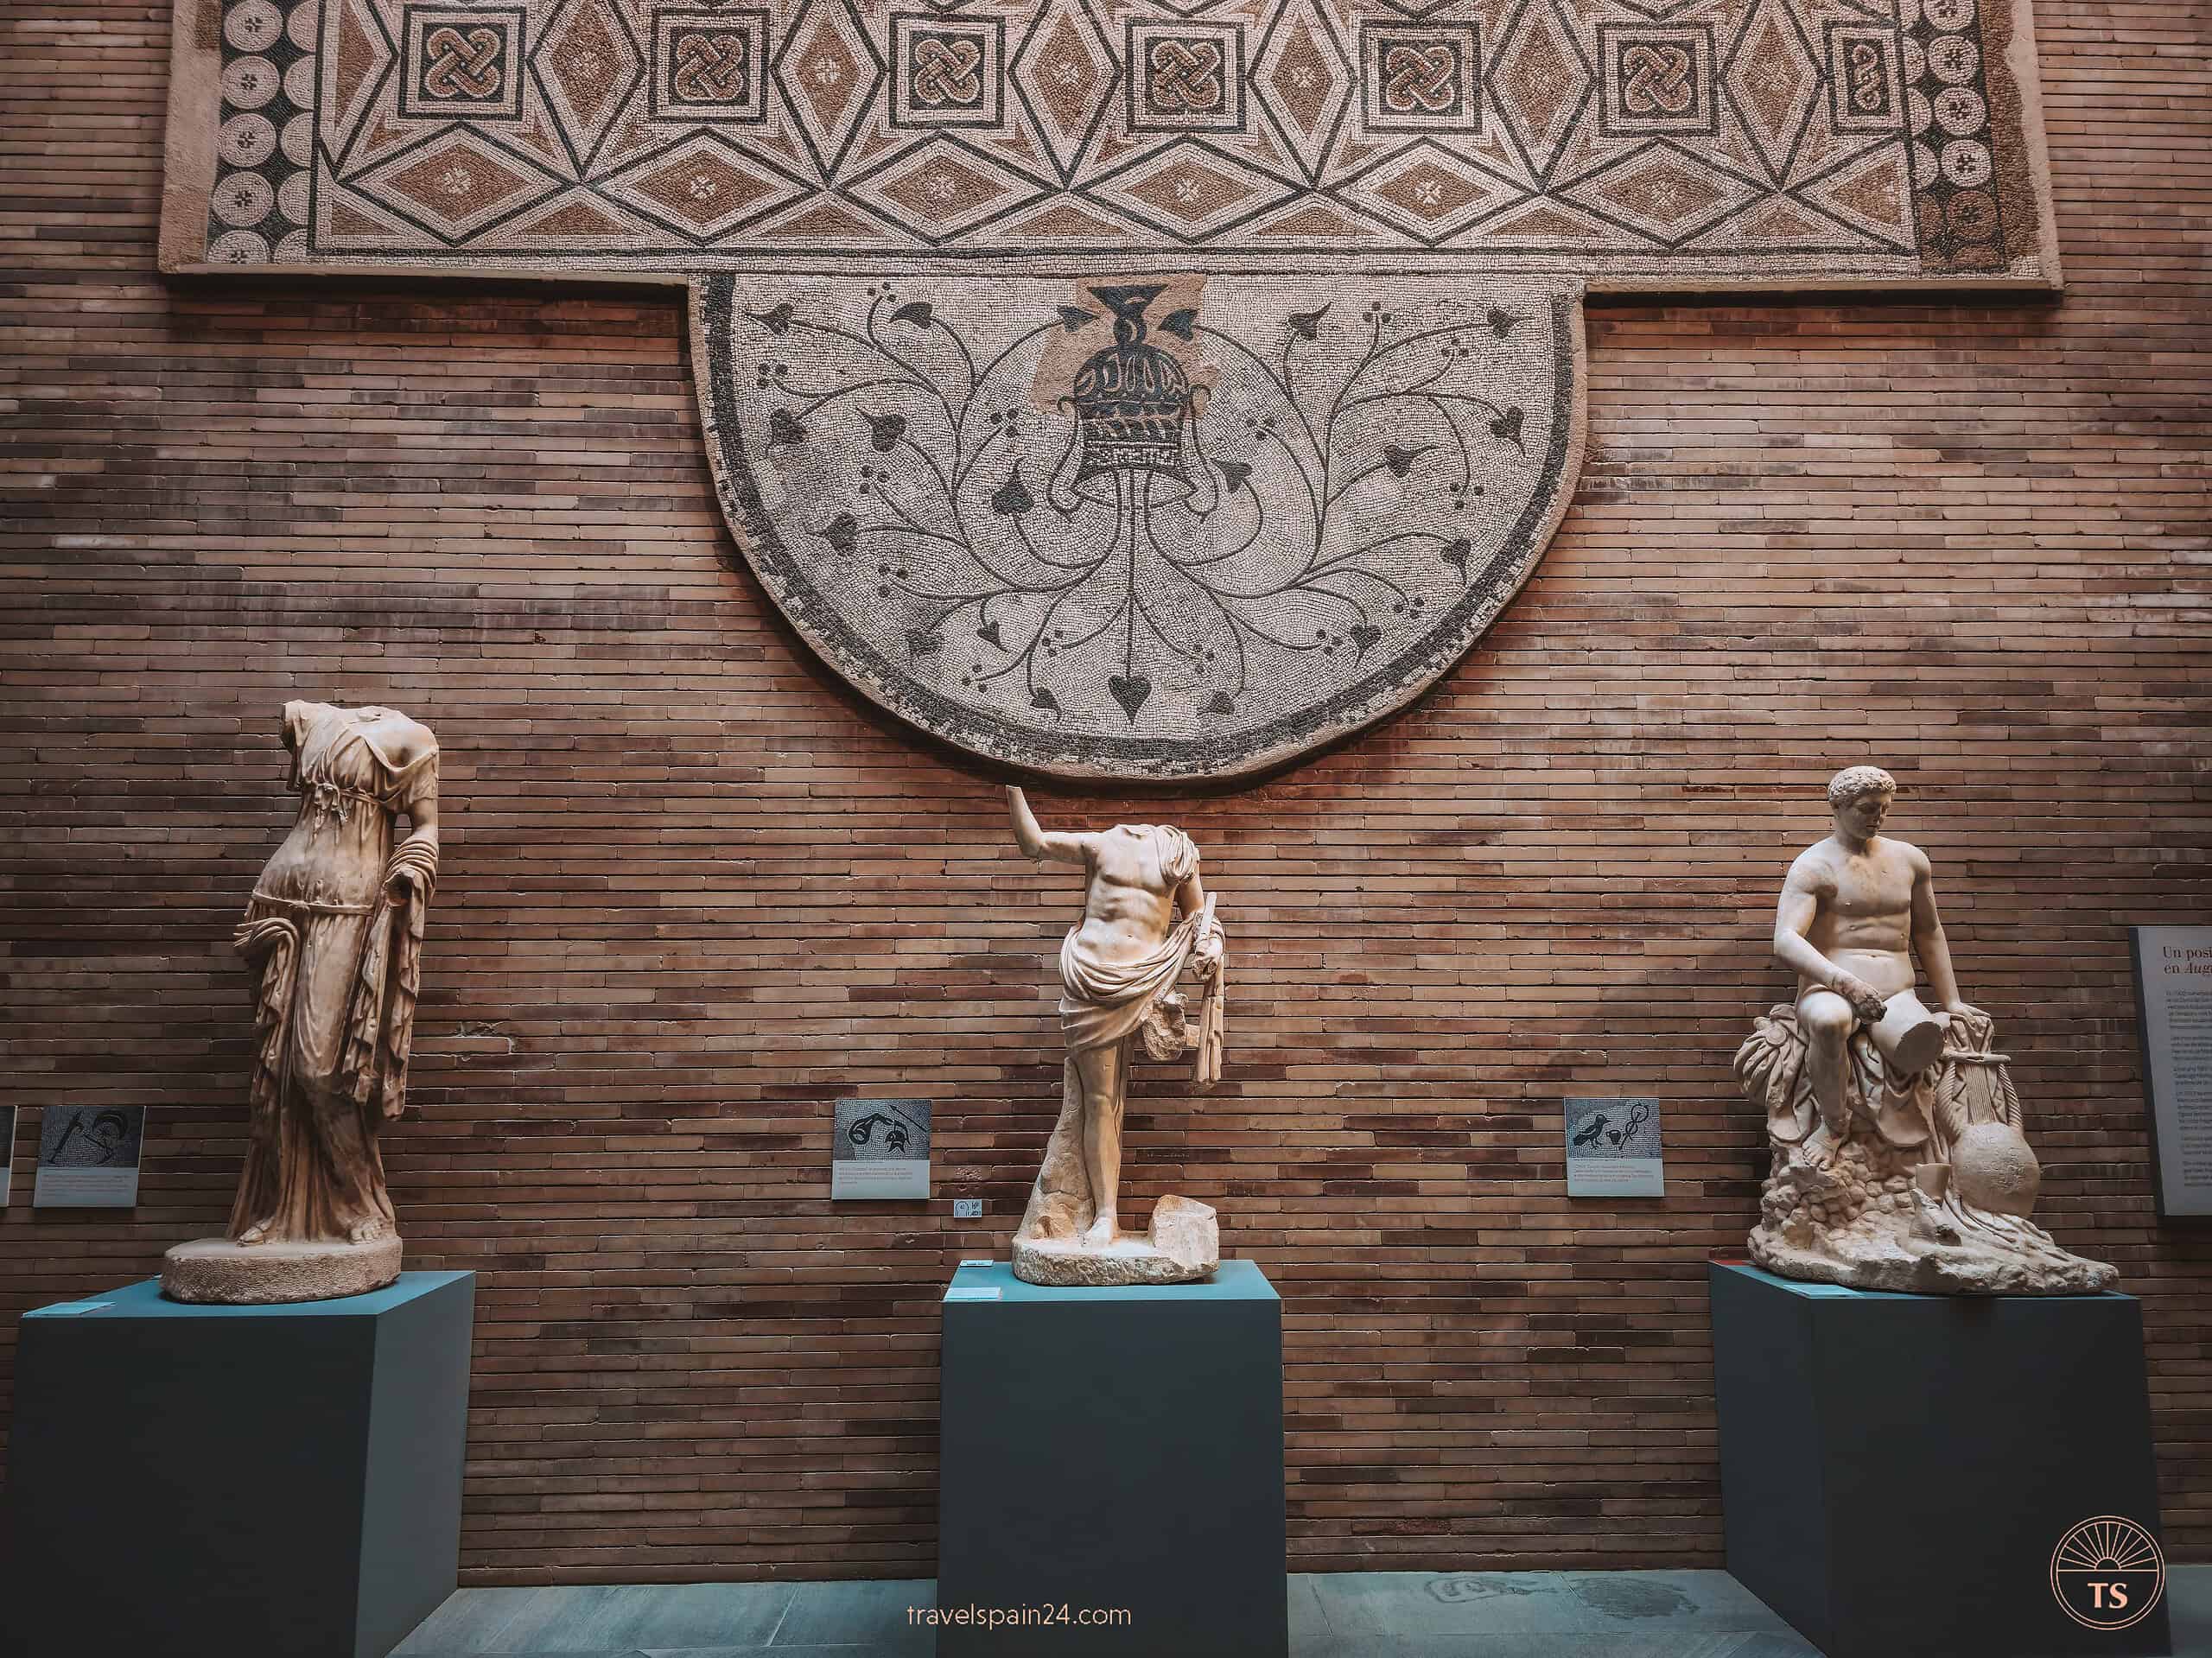 Three weathered statues and an ancient Roman mosaic floor displayed at the National Museum of Roman Art in Mérida, reflecting the city's deep archaeological heritage.